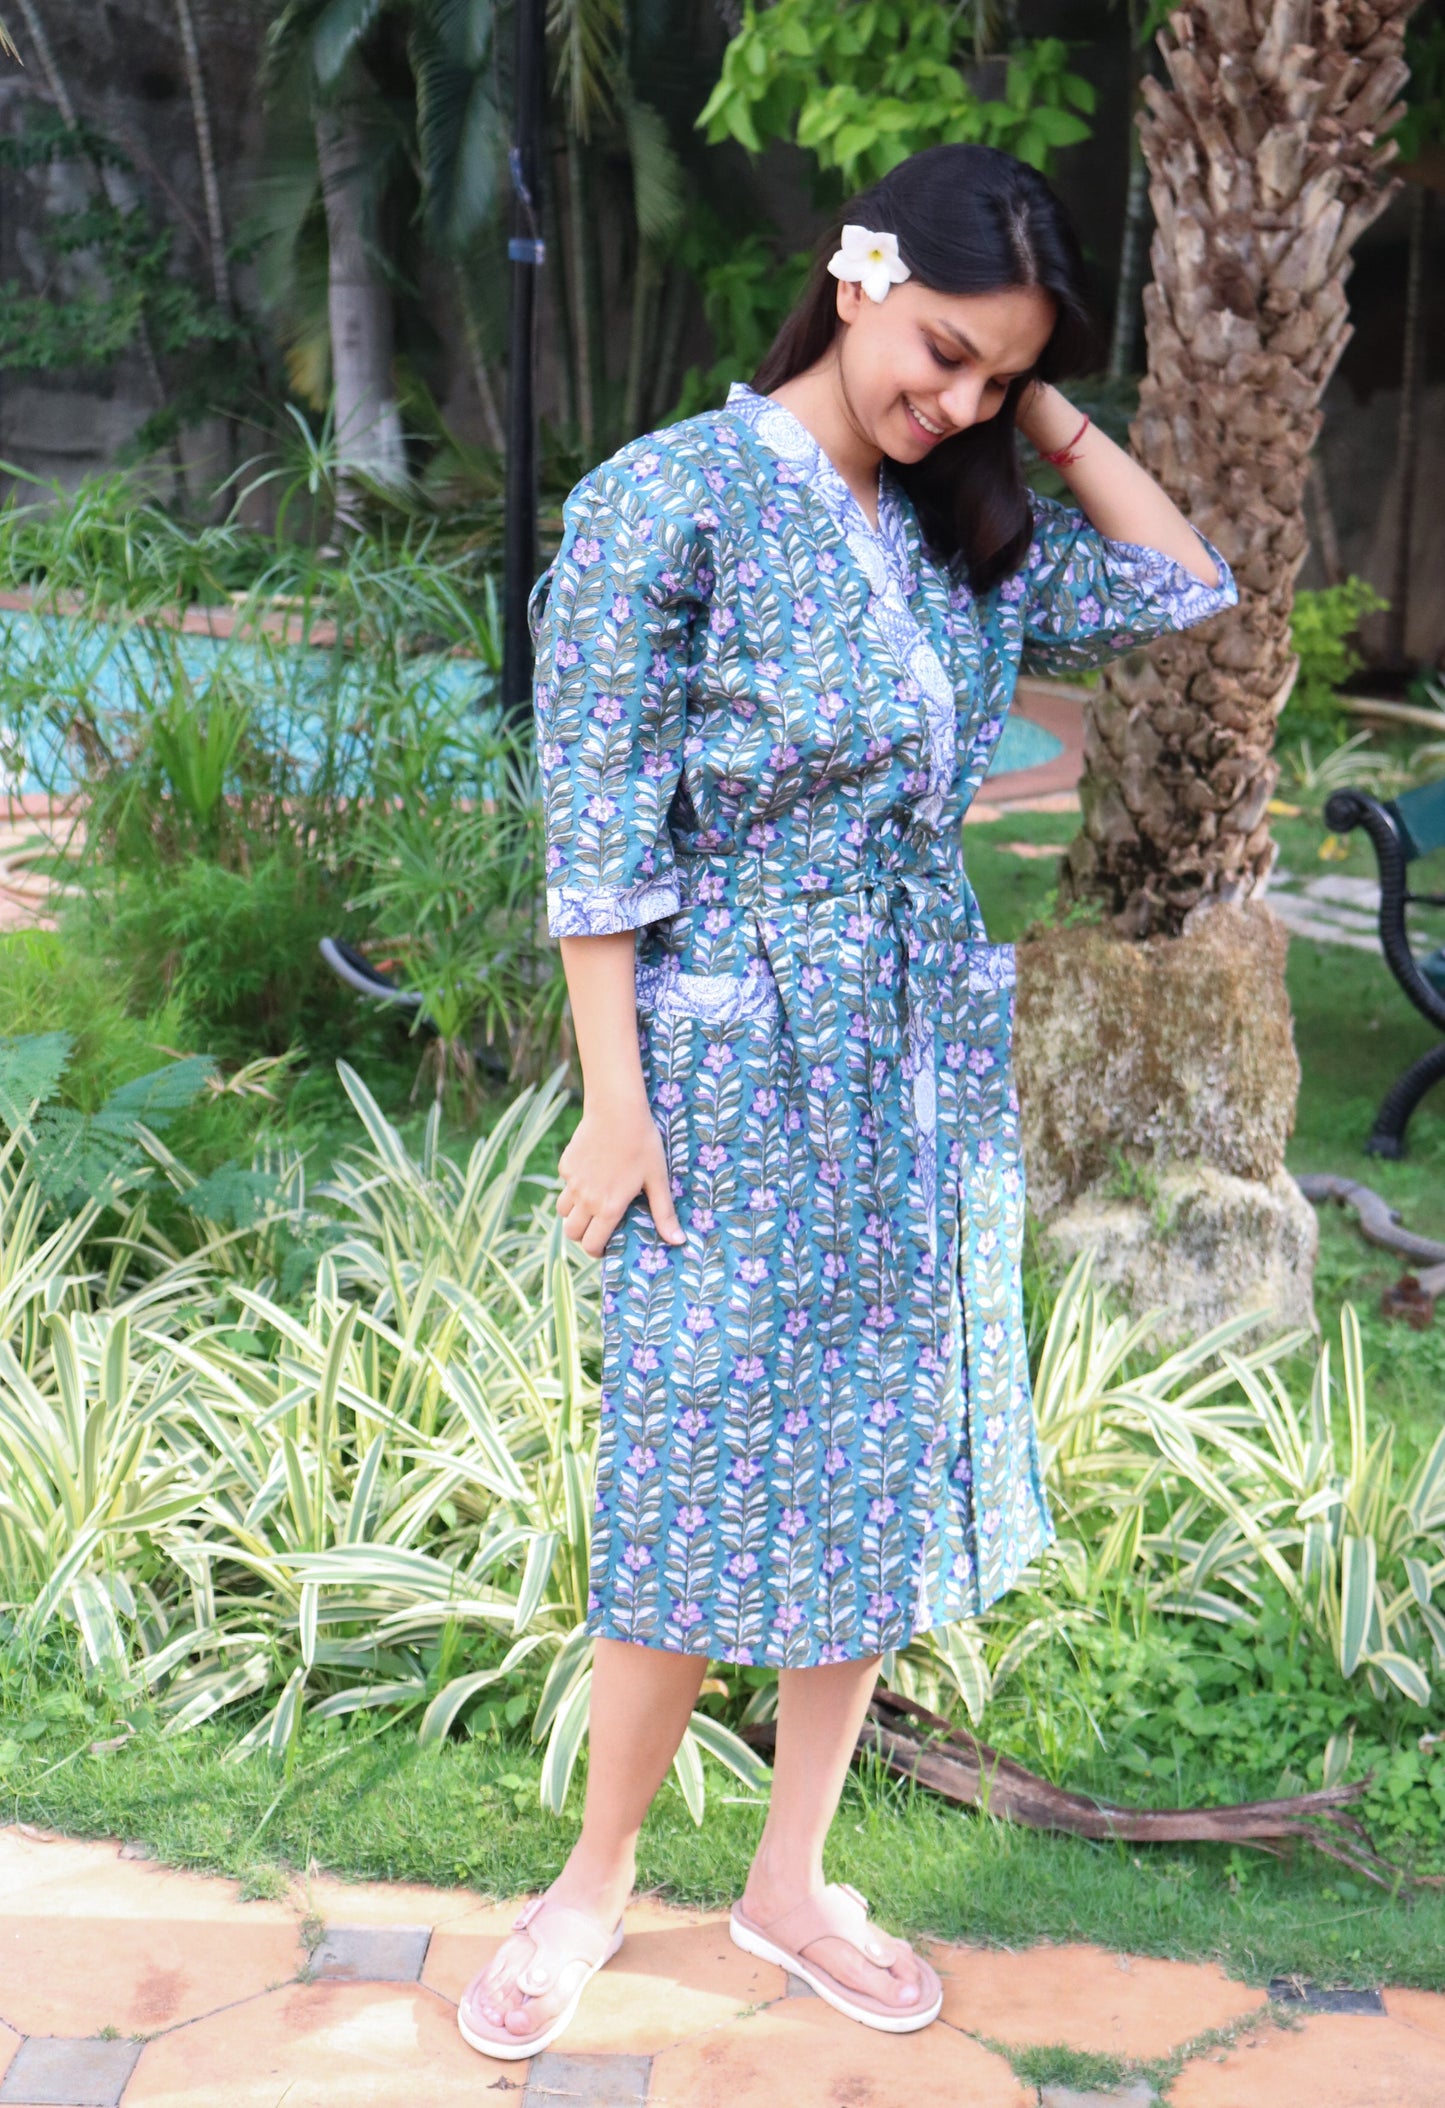 Green Cotton robe for women - Block print robes - beach cover up - Green and lilac floral